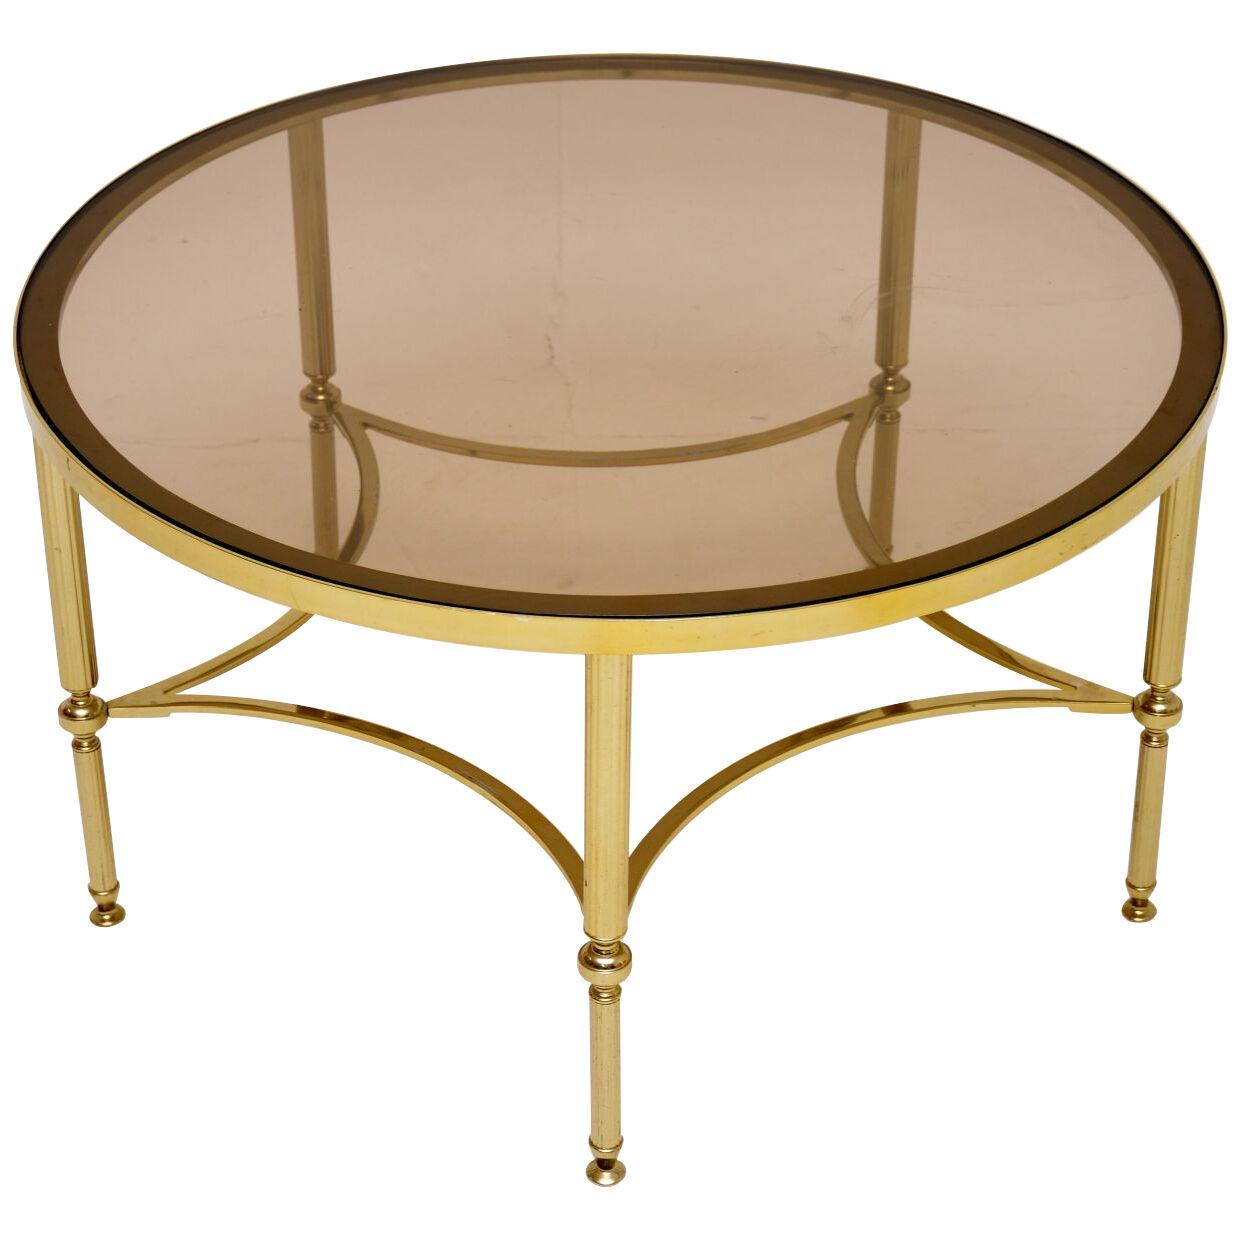 1960's Vintage French Brass & Glass Coffee Table